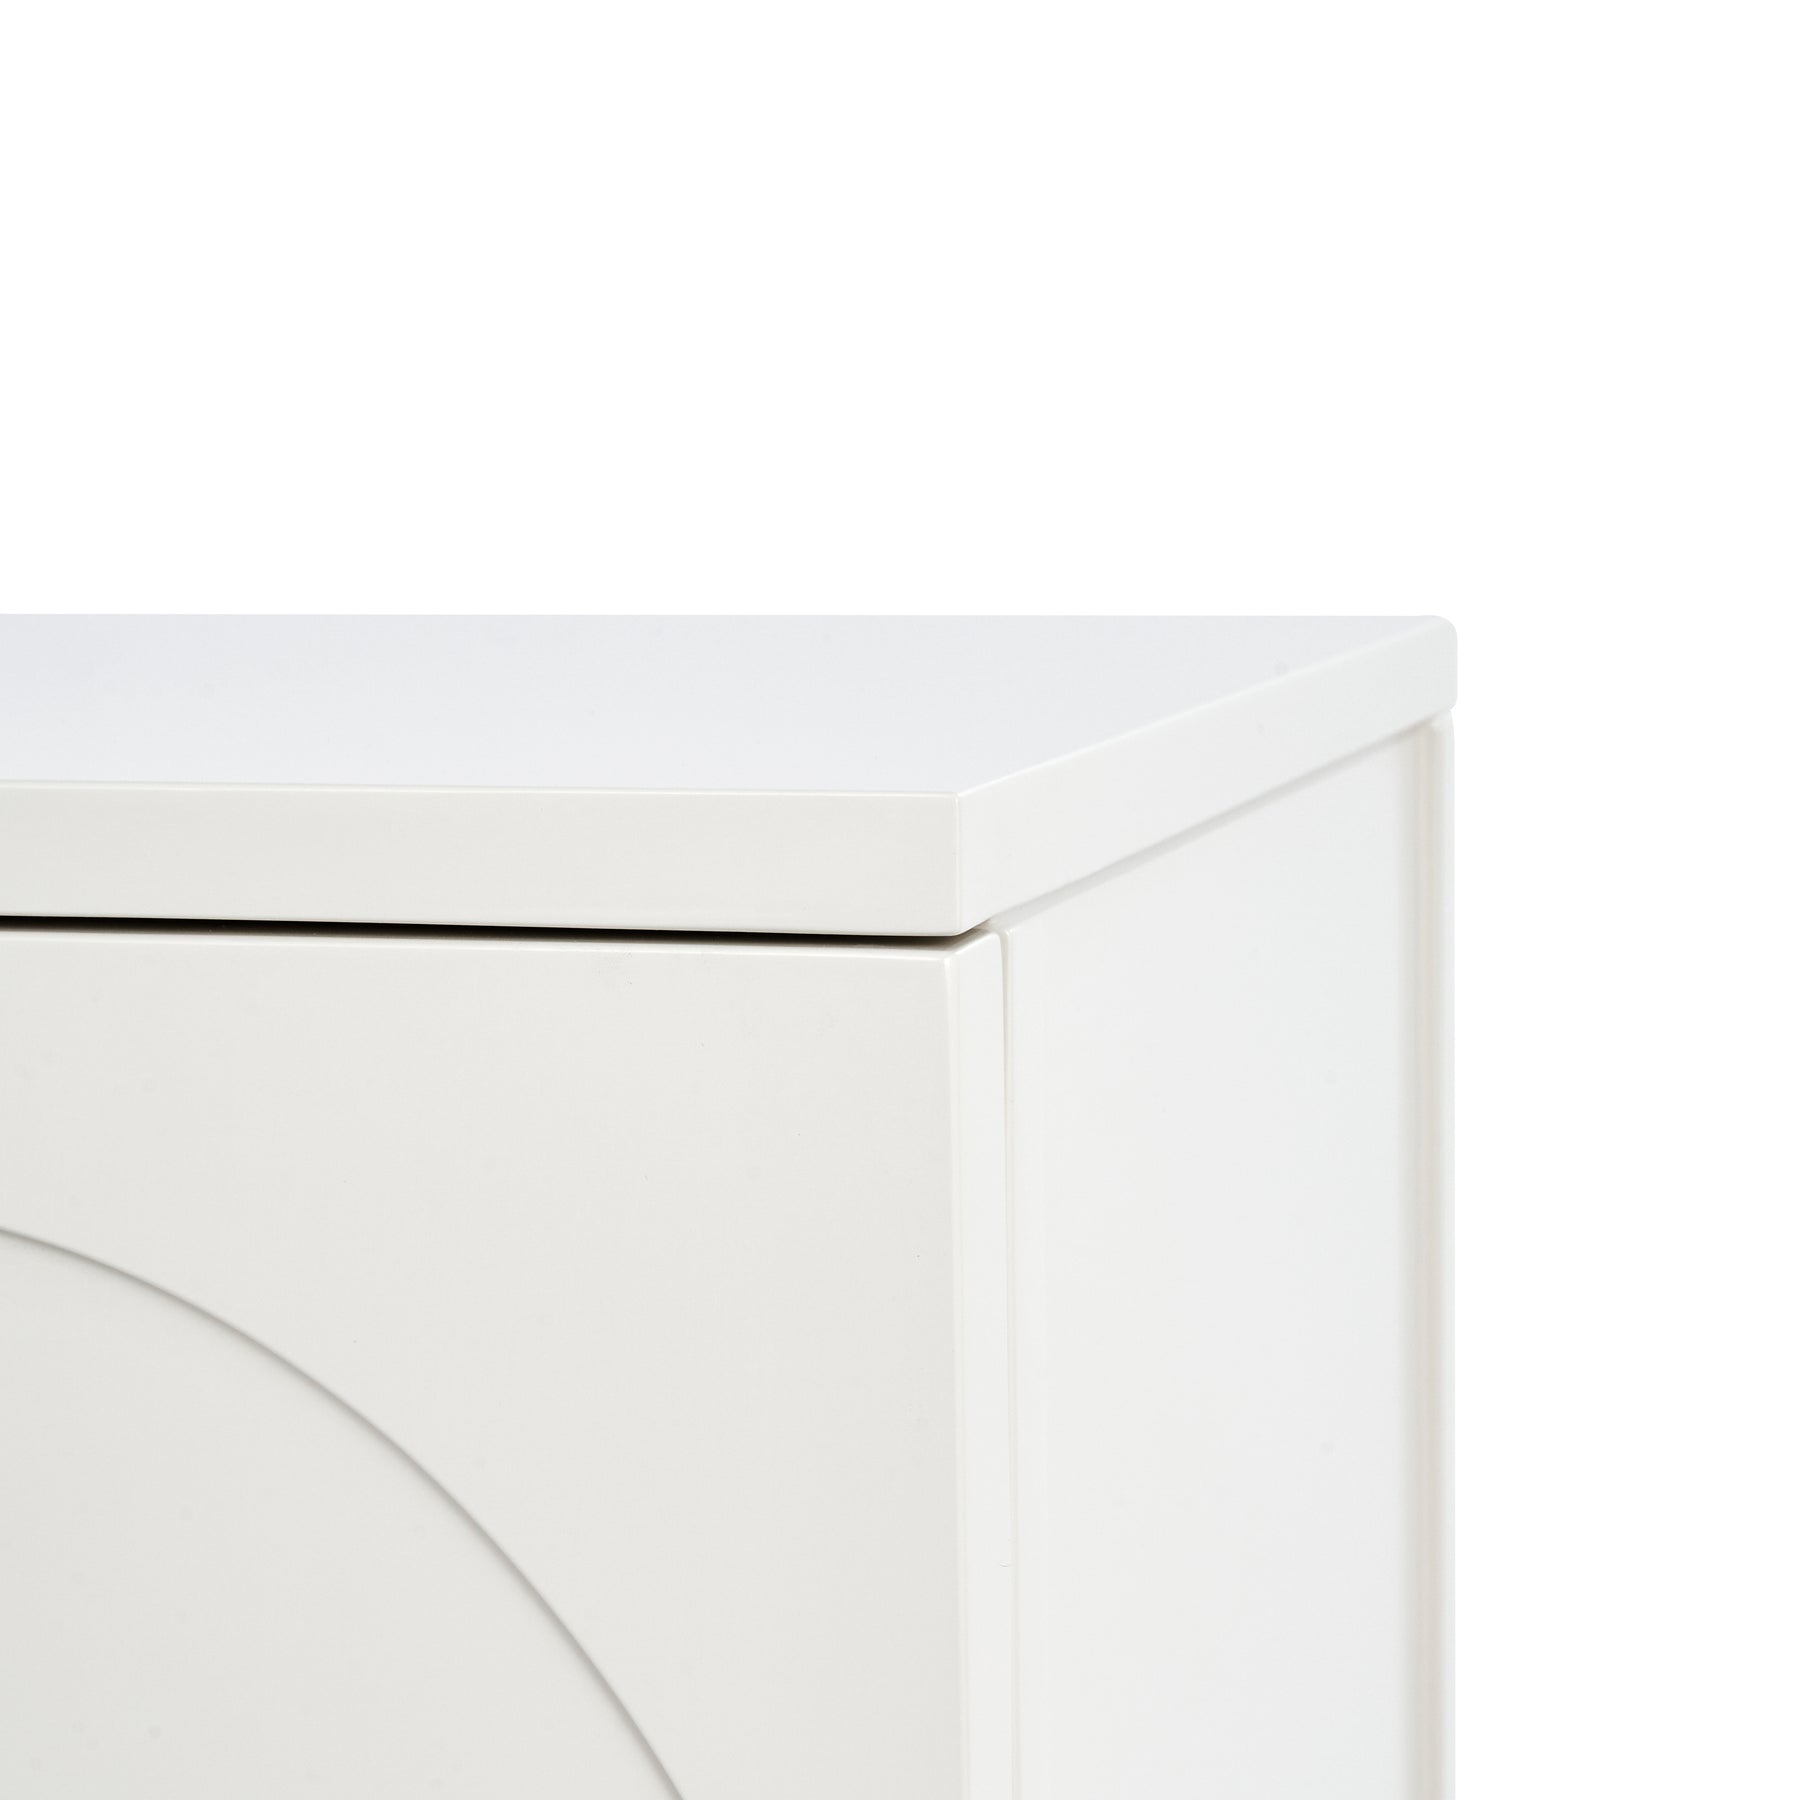 White Long Sideboard Cabinet